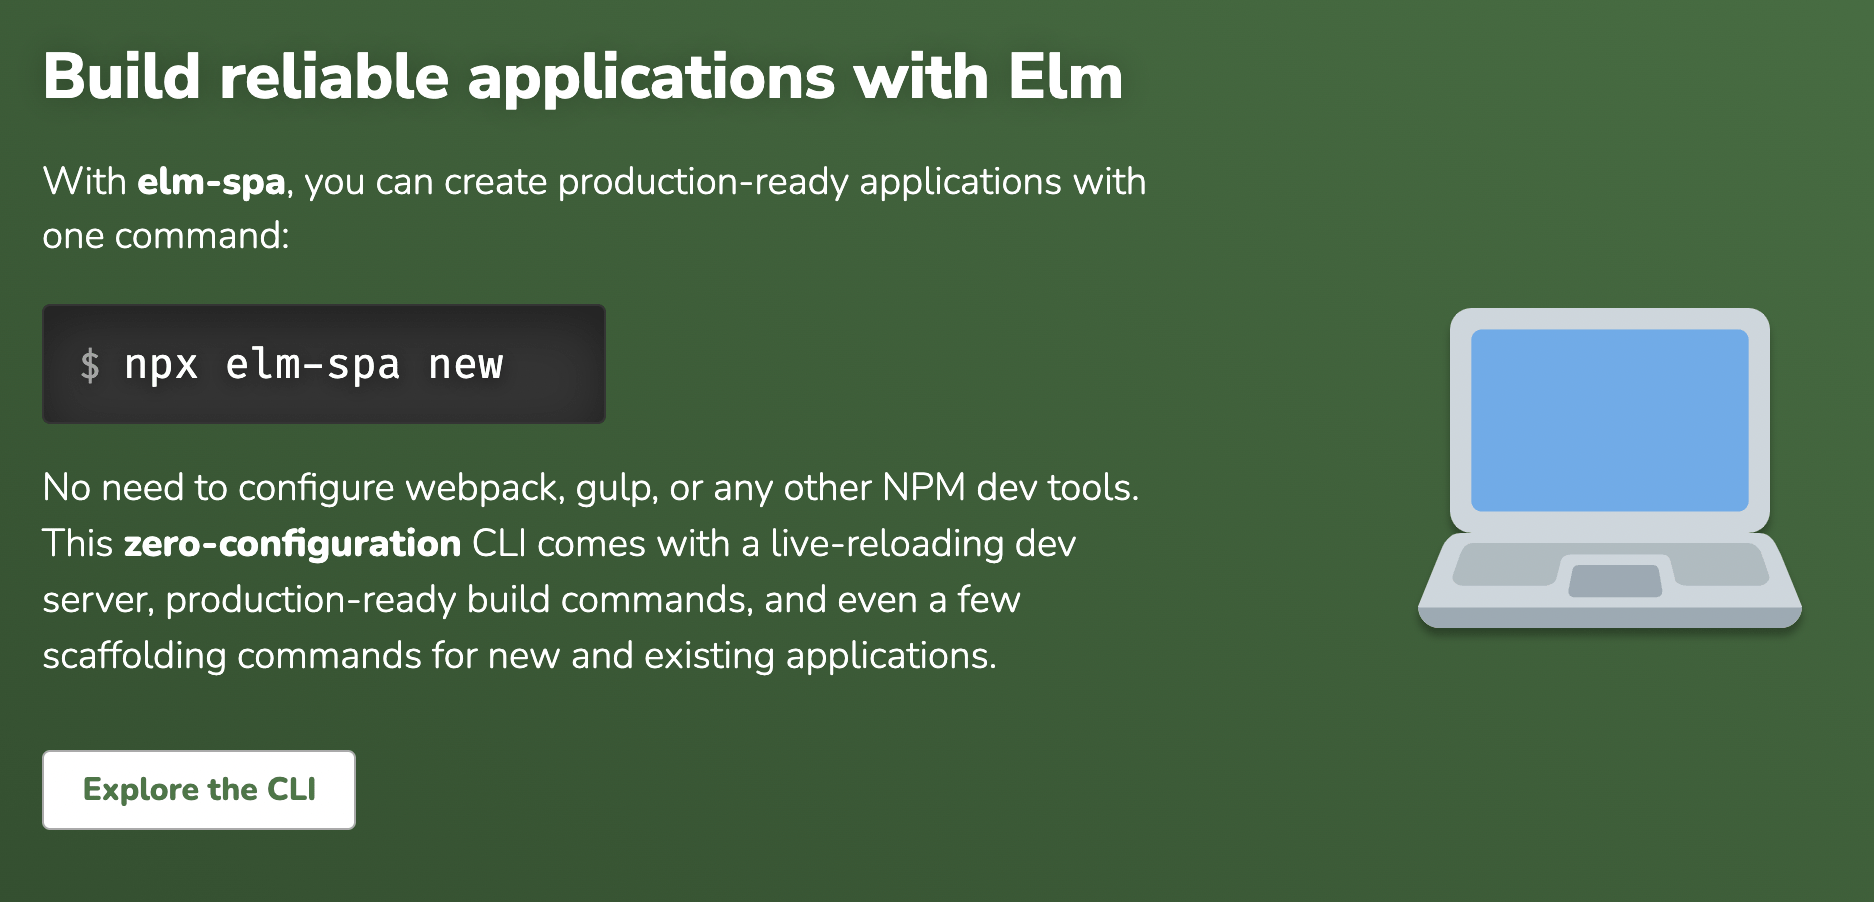 Build reliable applications with Elm. With elm-spa, you can create production-ready application with one command: npx elm-spa new. No need to configure webpack, gulp, or any other NPM dev tools. This zero-configuration CLI comes with a live-reloading dev server, production-ready build commands, and even a few scaffolding commands for new and existing applications.